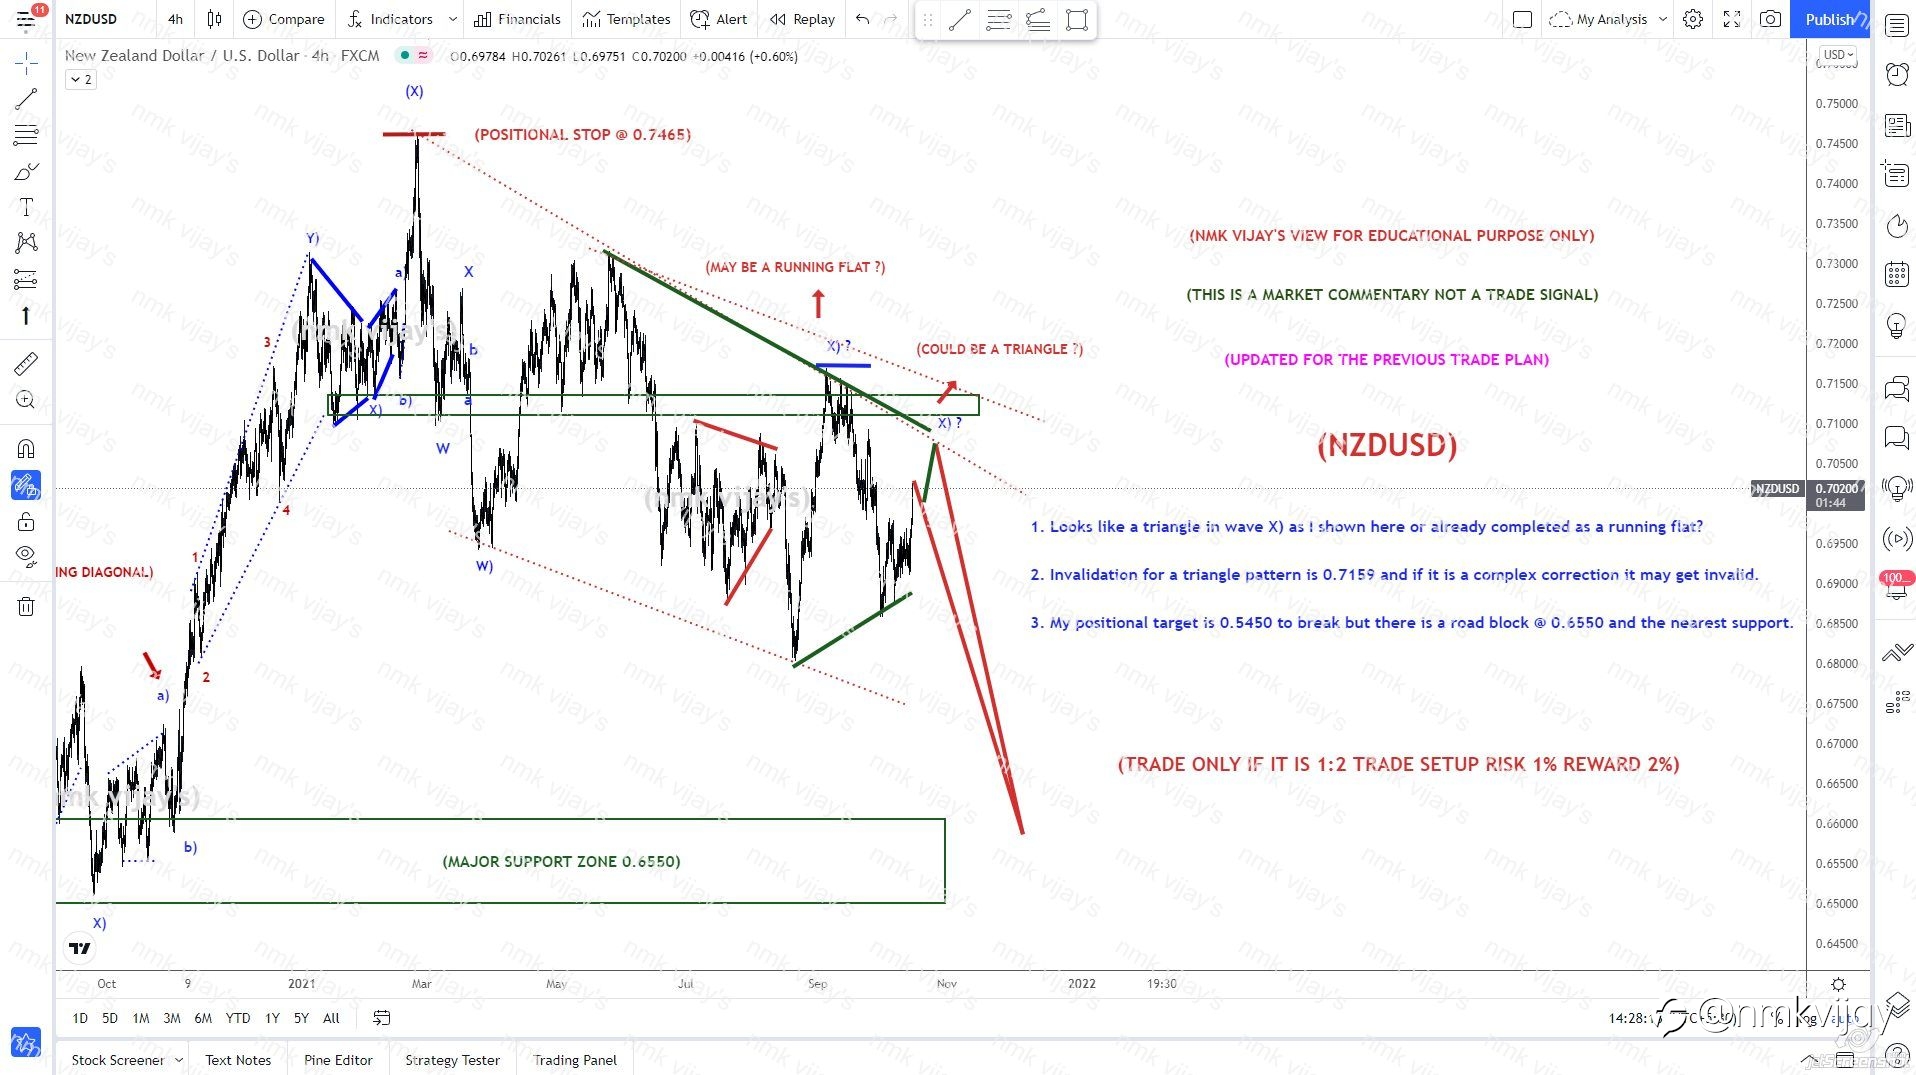 NZDUSD-Looking for triangle or already completed as running flat